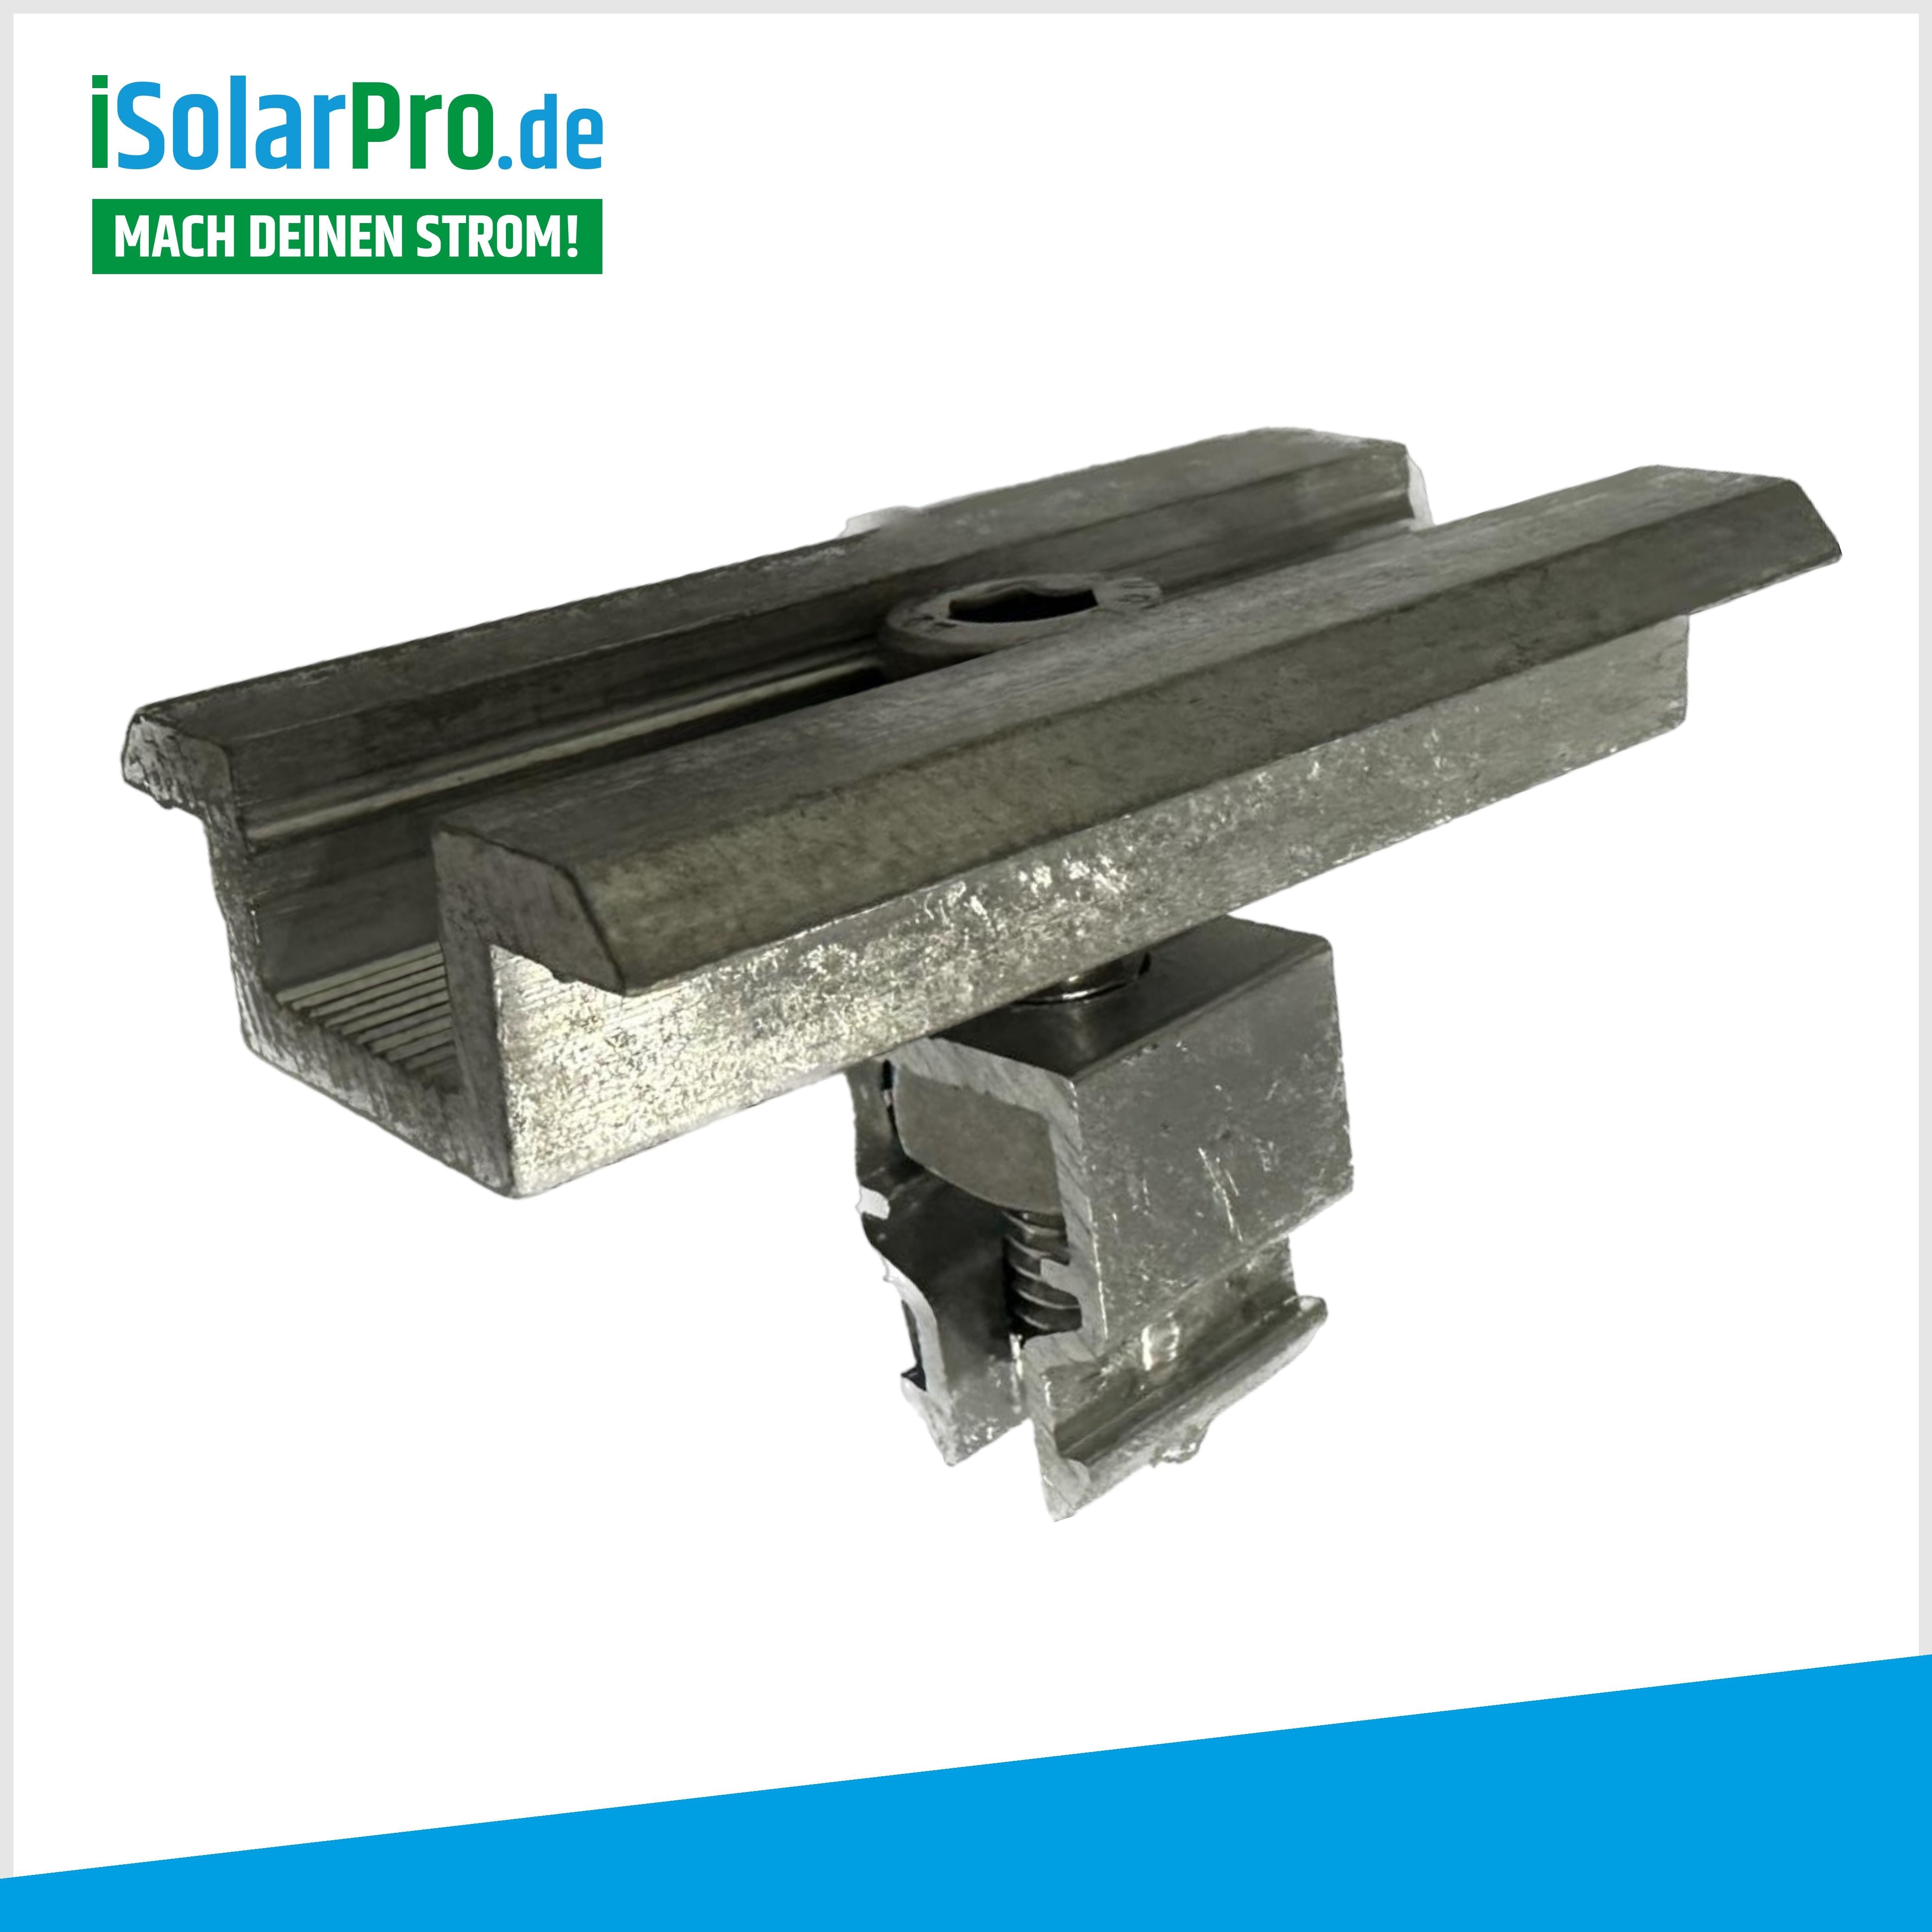 Middle clamp ALU Klickfix 35mm for solar modules, photovoltaic PV mounting 